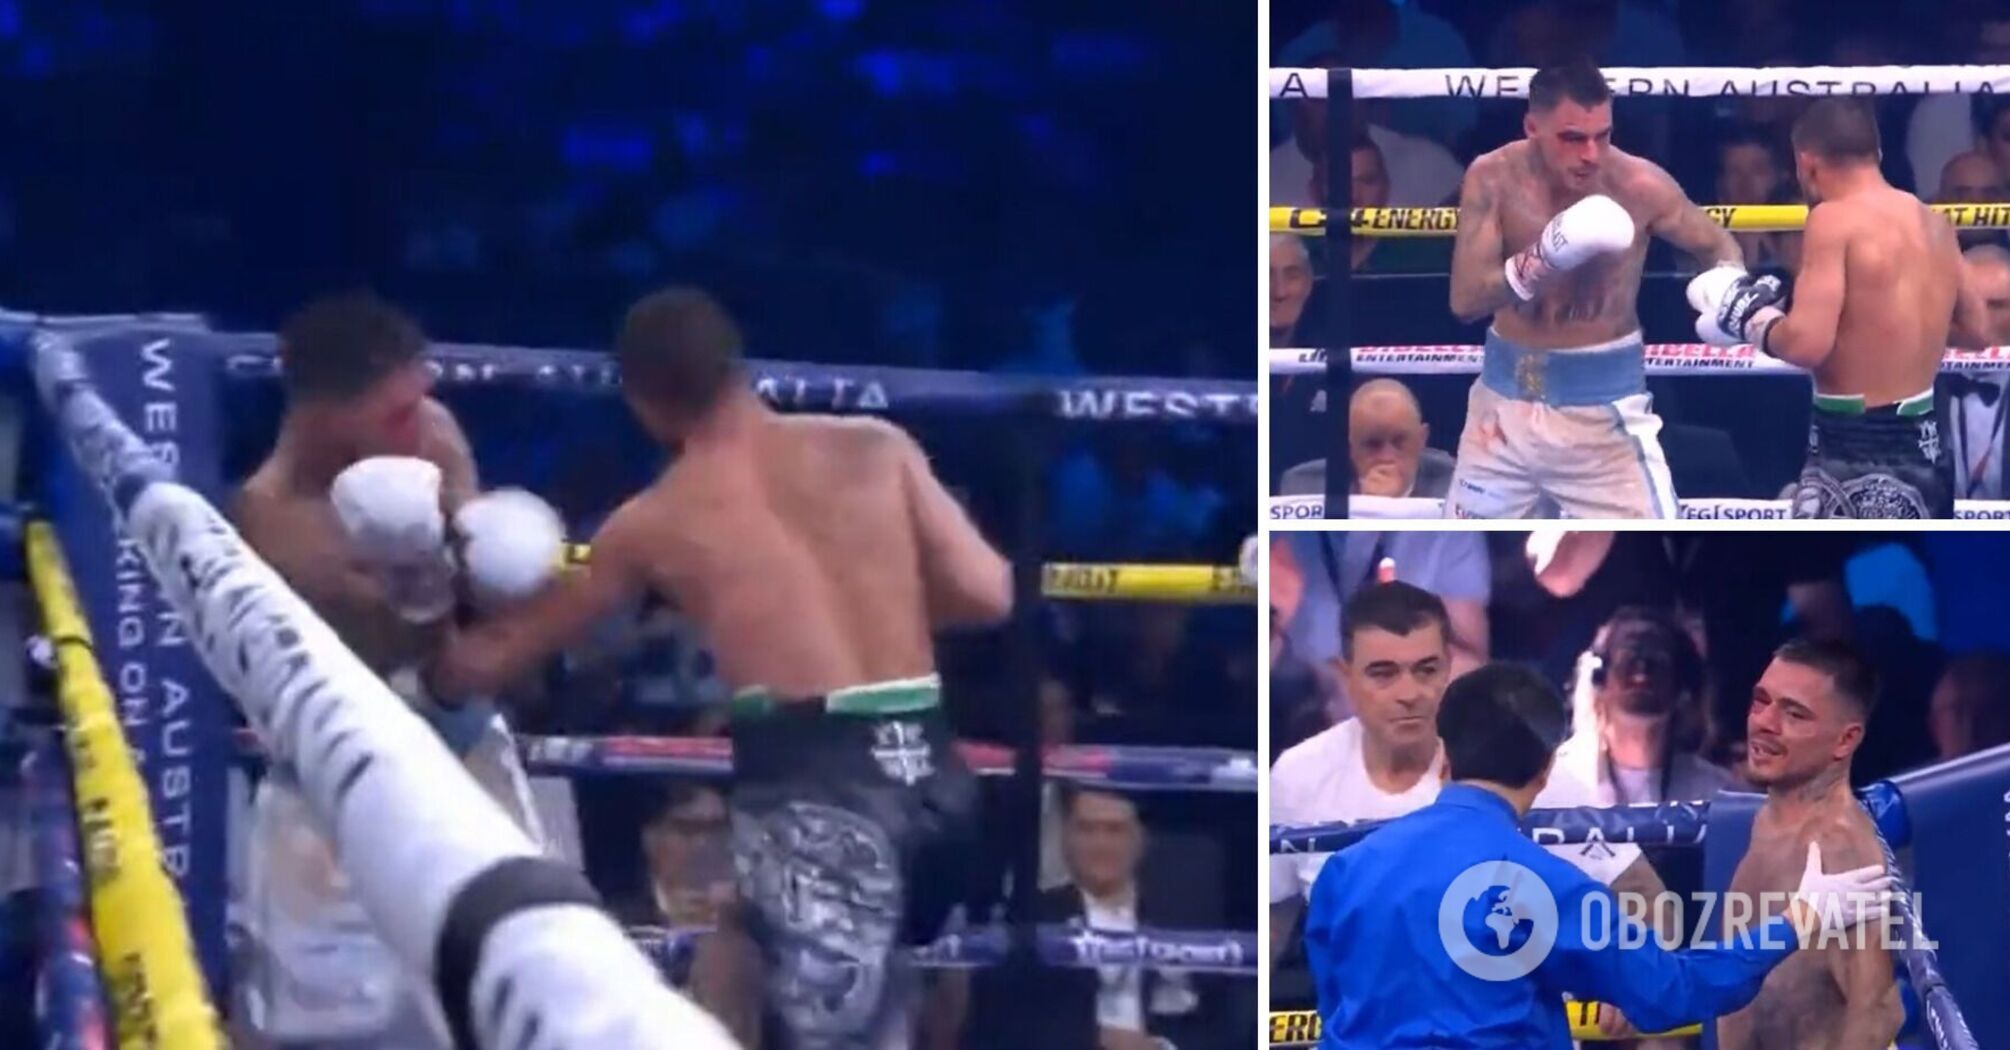 Video of the knockout in the Lomachenko-Kambososos fight appeared online